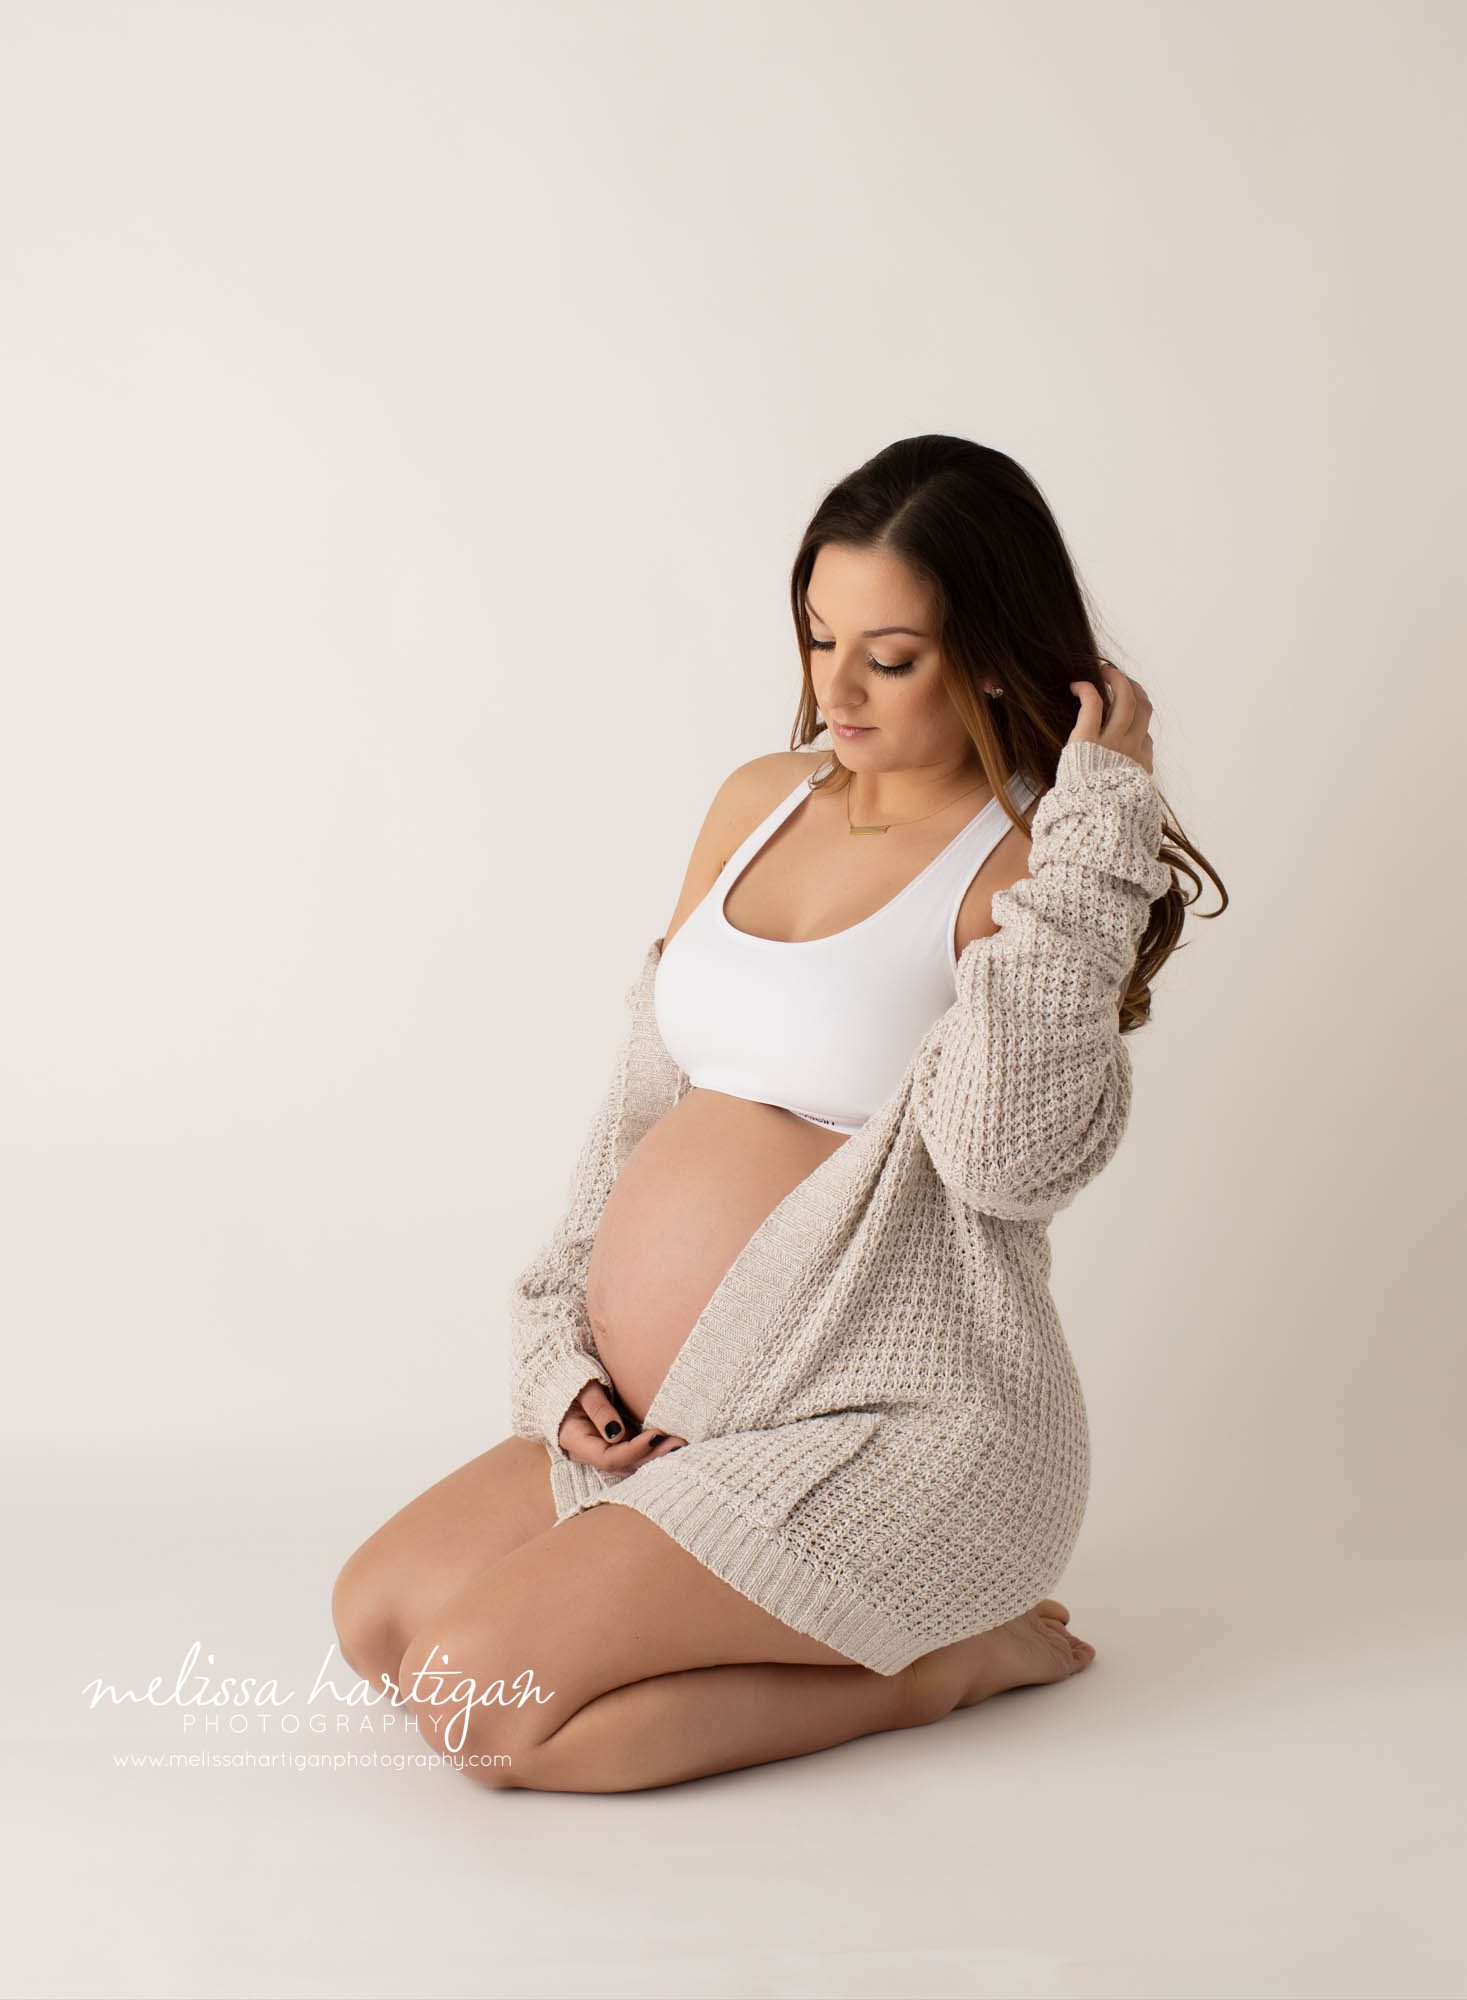 expectant mom sitting on floo holding top of baby belly brushing fingers through hair looking at camera hartford county maternity photography